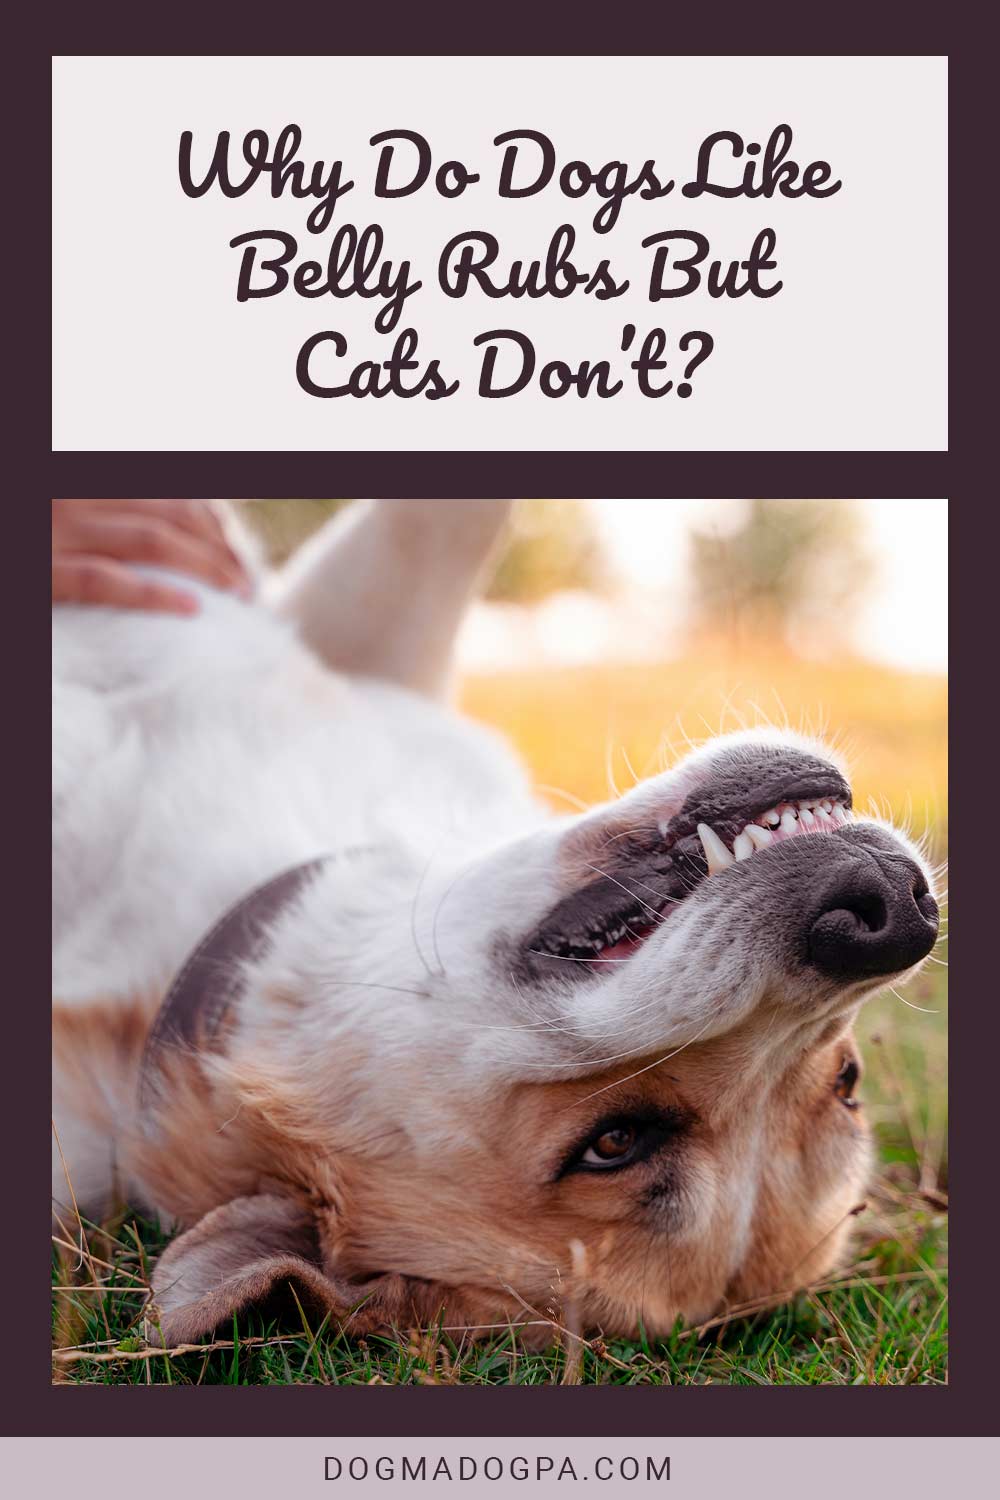 Why Do Dogs Like Belly Rubs But Cats Don’t?